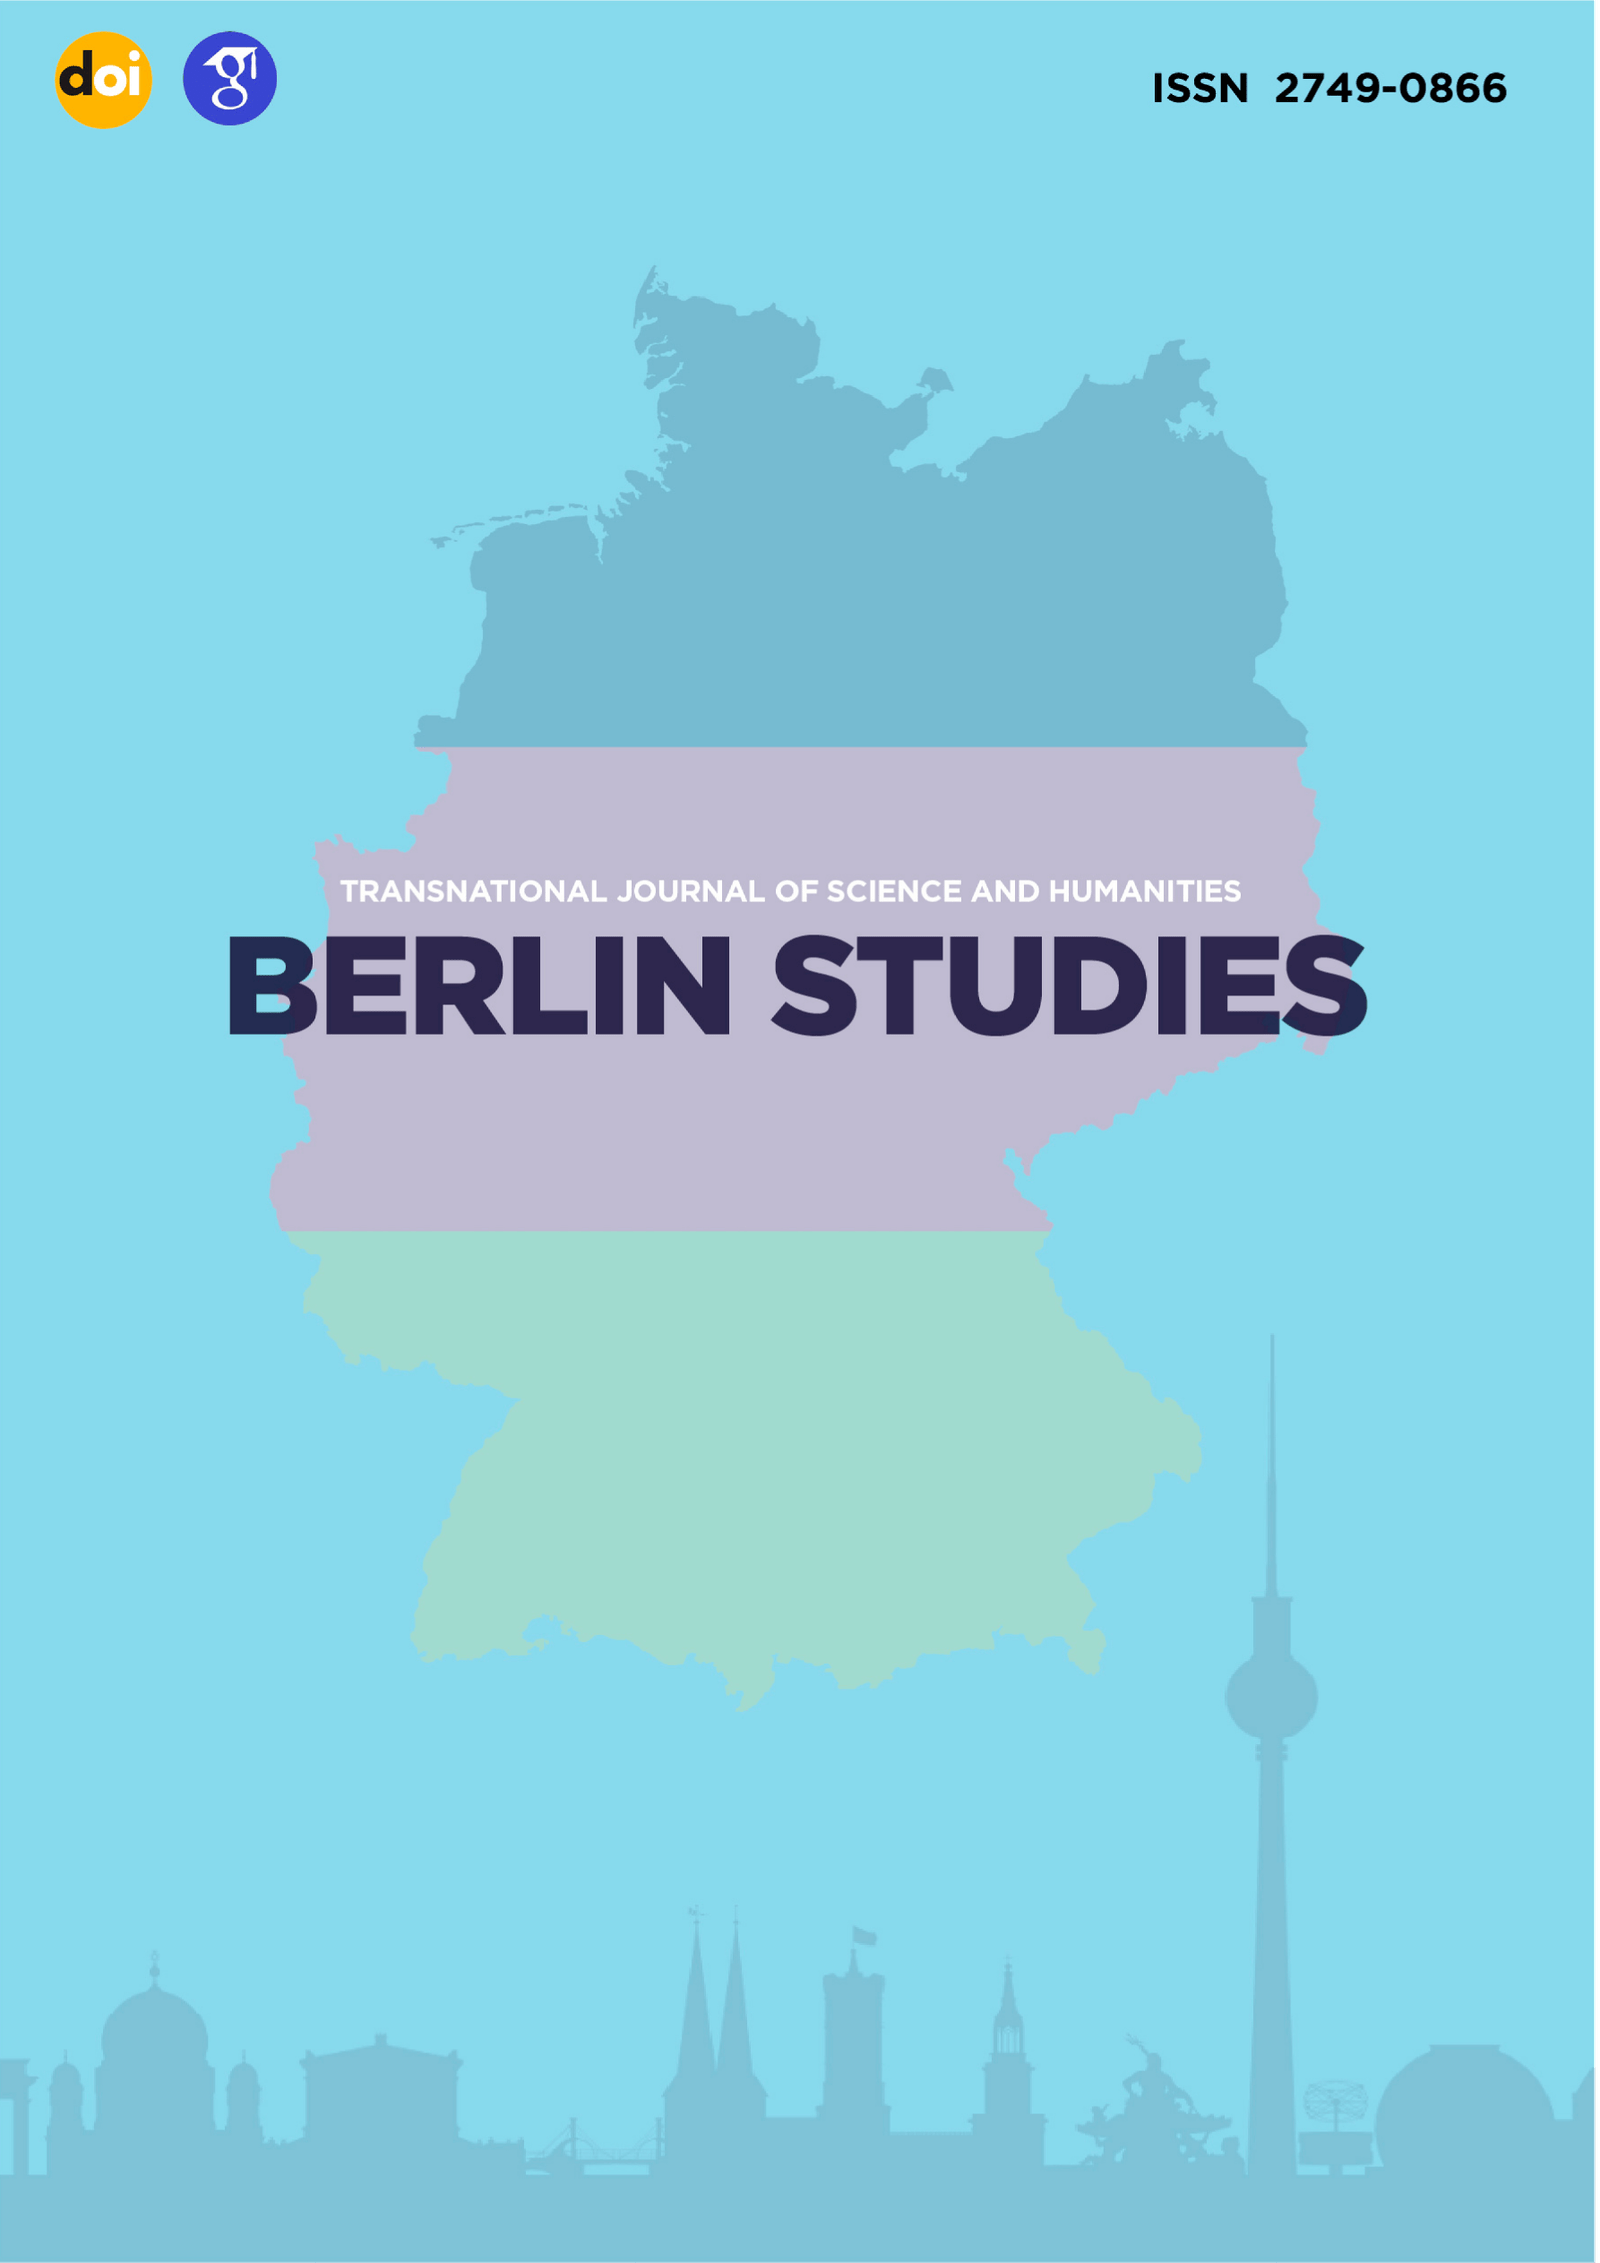 					View Vol. 2 No. 1.7 Philosophical sciences (2022): Berlin Studies Transnational Journal of Science and Humanities
				